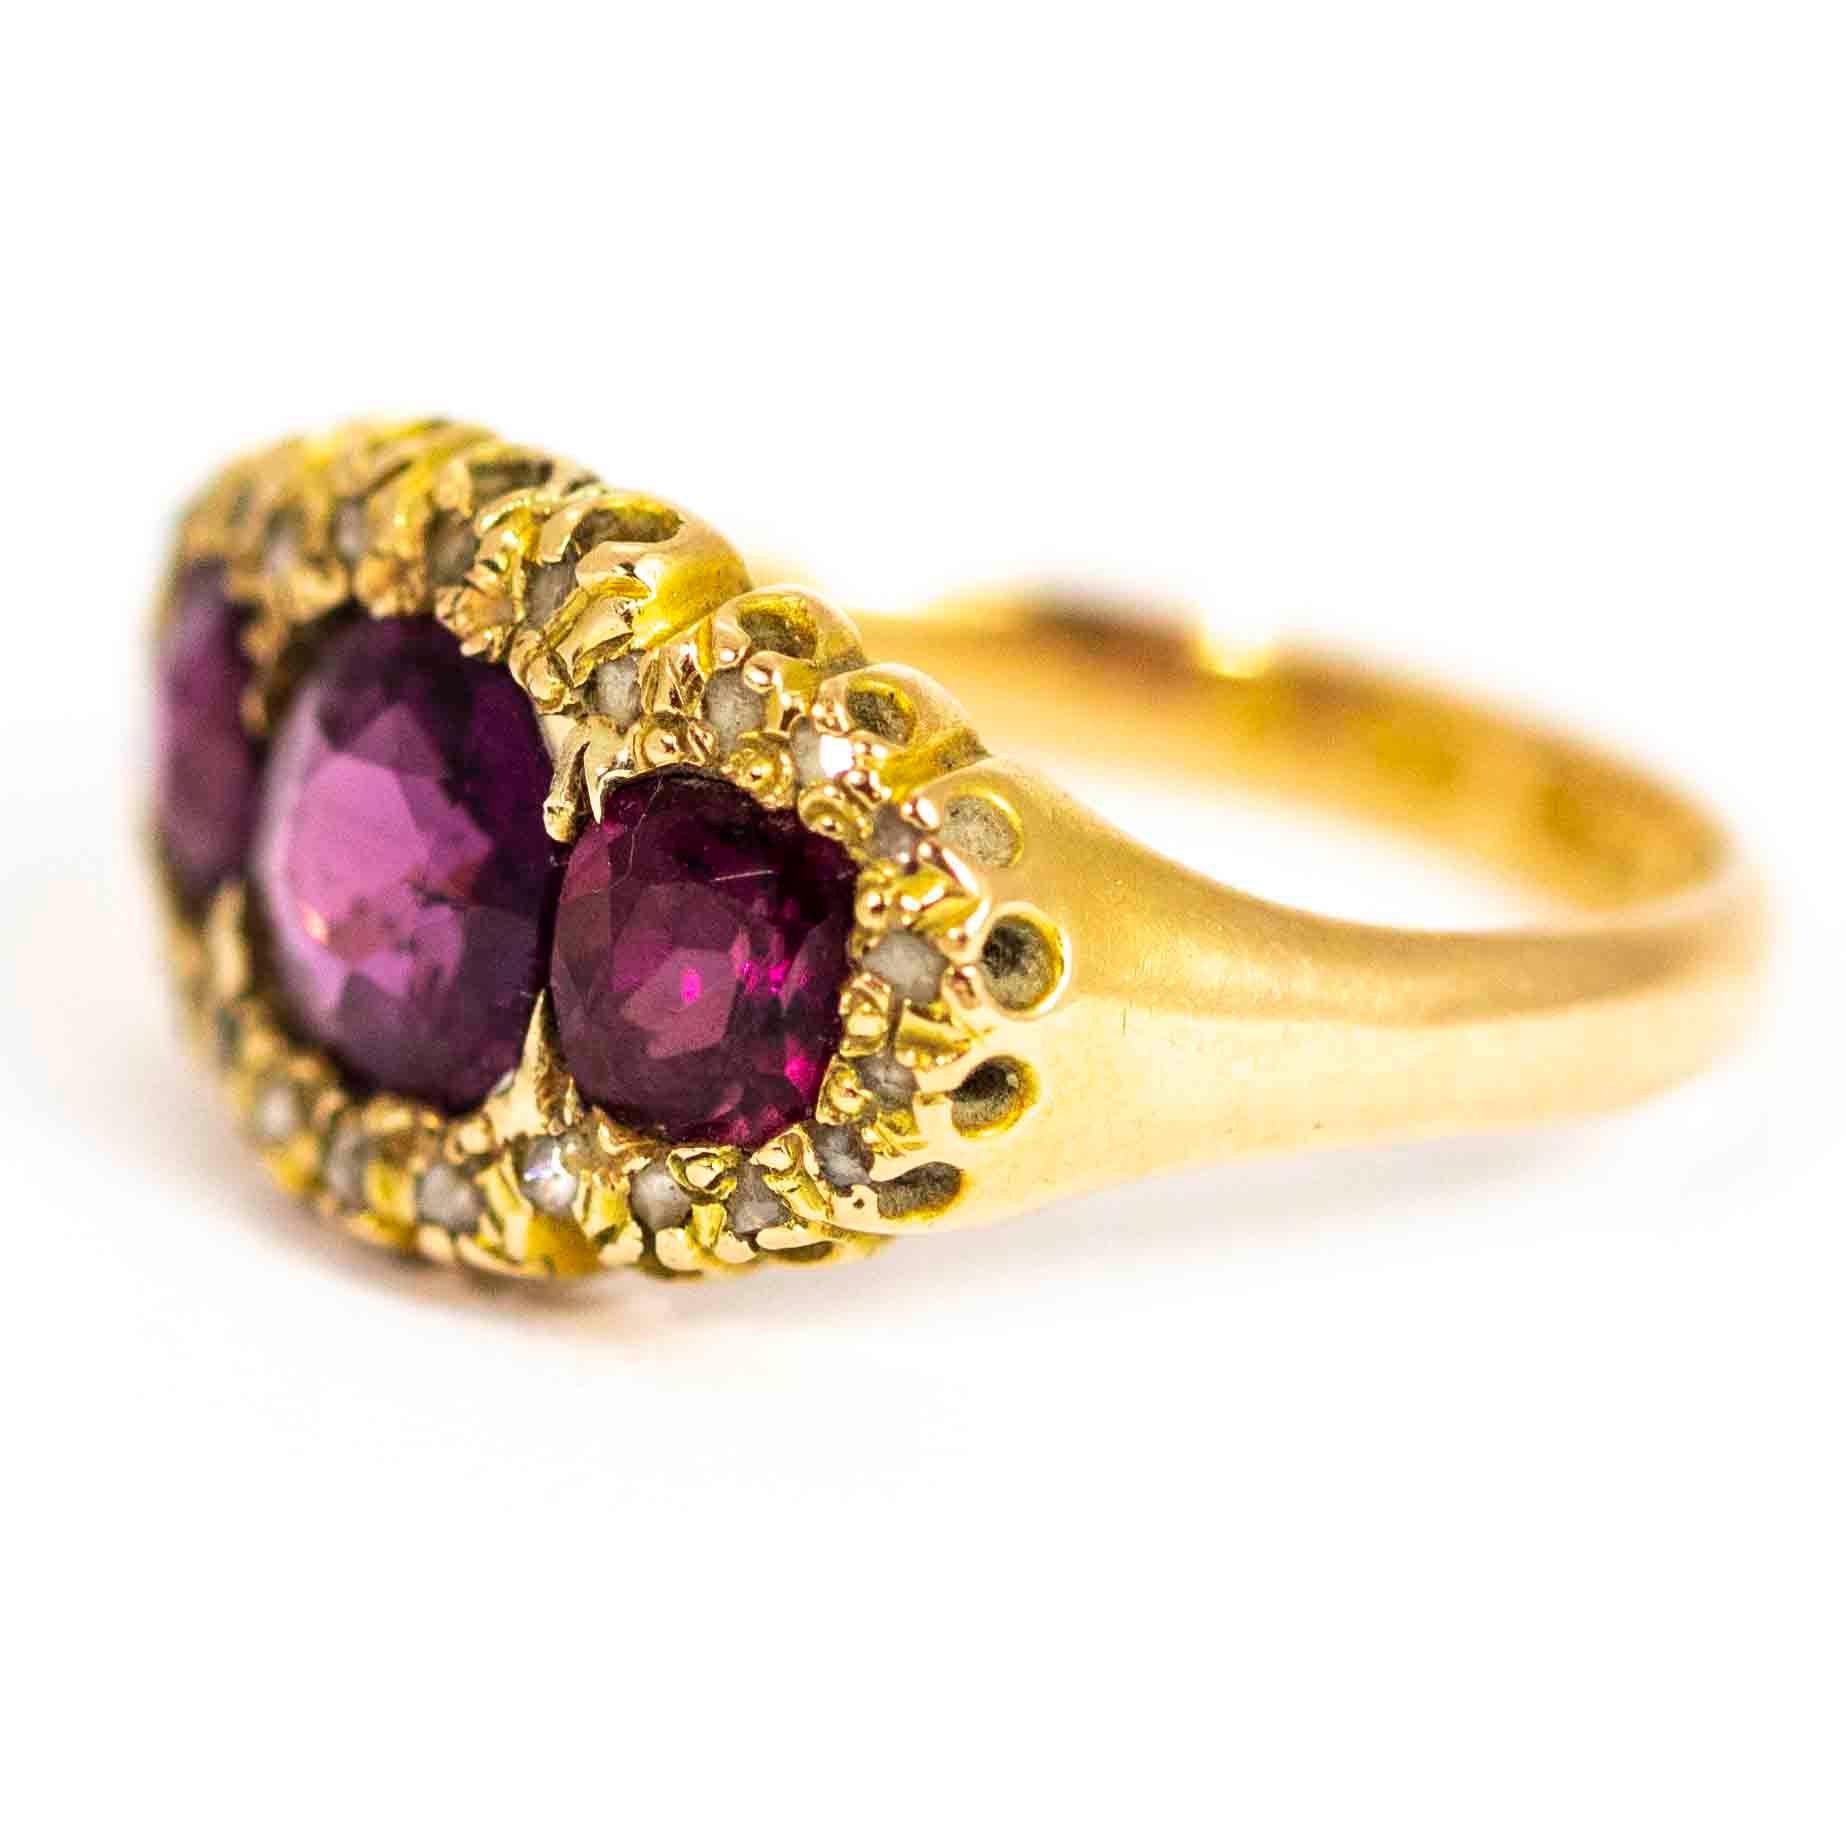 A beautiful antique victorian ring. Set with three wonderful cushion cut garnets surrounded by a large halo of 26 rose cut diamonds. Modelled in 15 carat yellow gold. Fully hallmarked 1874 Birmingham, England.

Ring Size: UK O, US 7